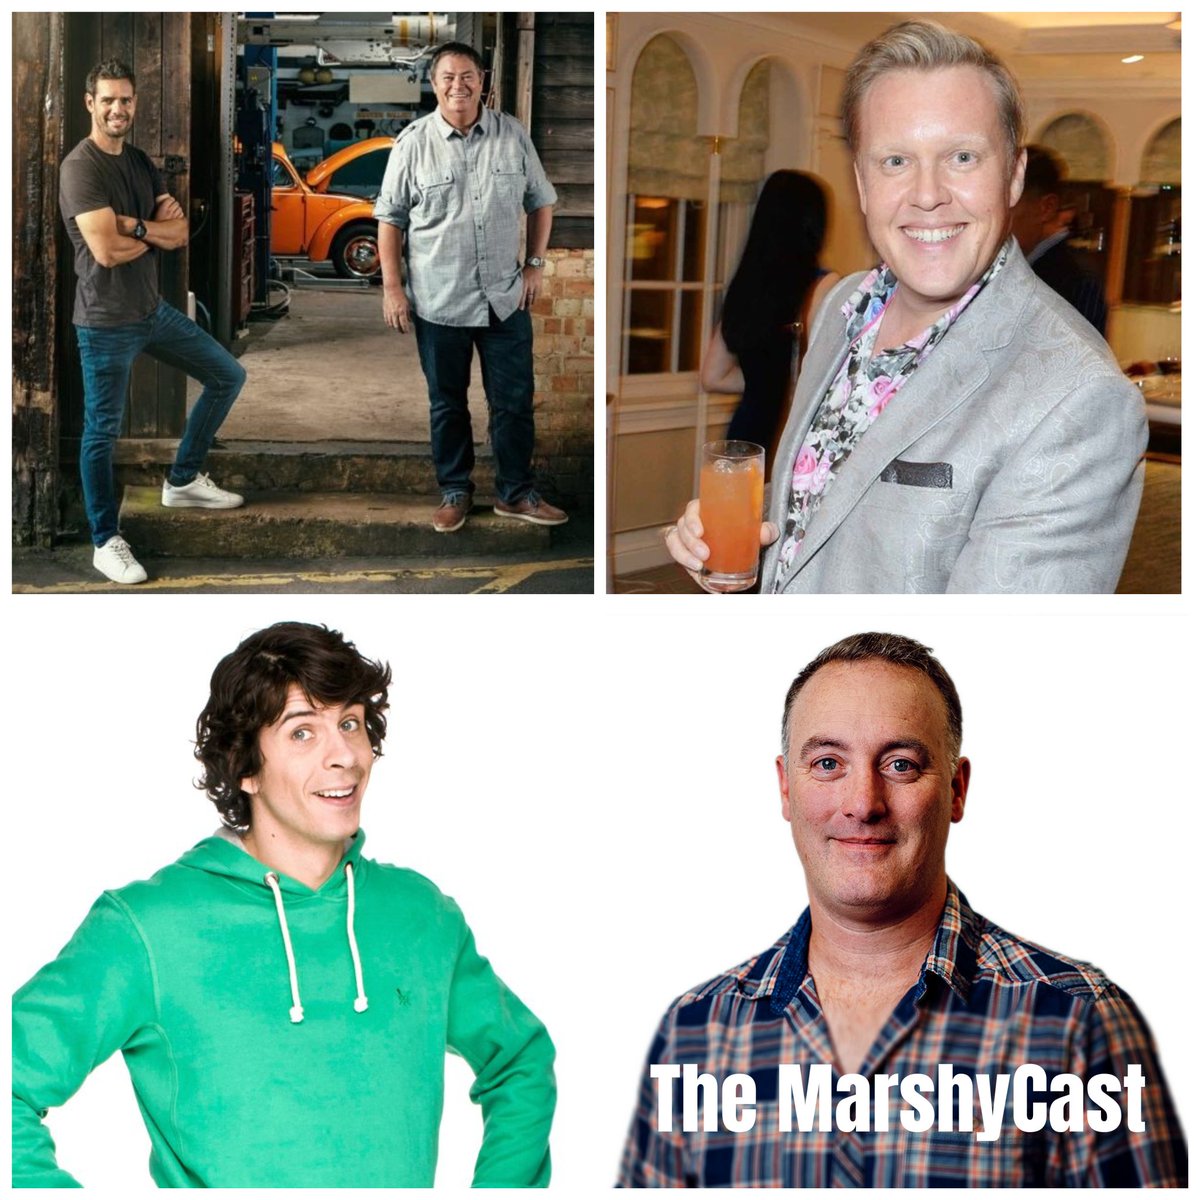 🎉 #TheMarshyCast is here! 🚗 @mikebrewer & @f1elvis of @wheelerdealers on the new season of the show on @discoveryplusuk 🍷 Presenter @jollyolly spoke about his new Wine menu on @pandocruises 🎸 @andyoddsock on touring across the UK Search for the podcast or click the link